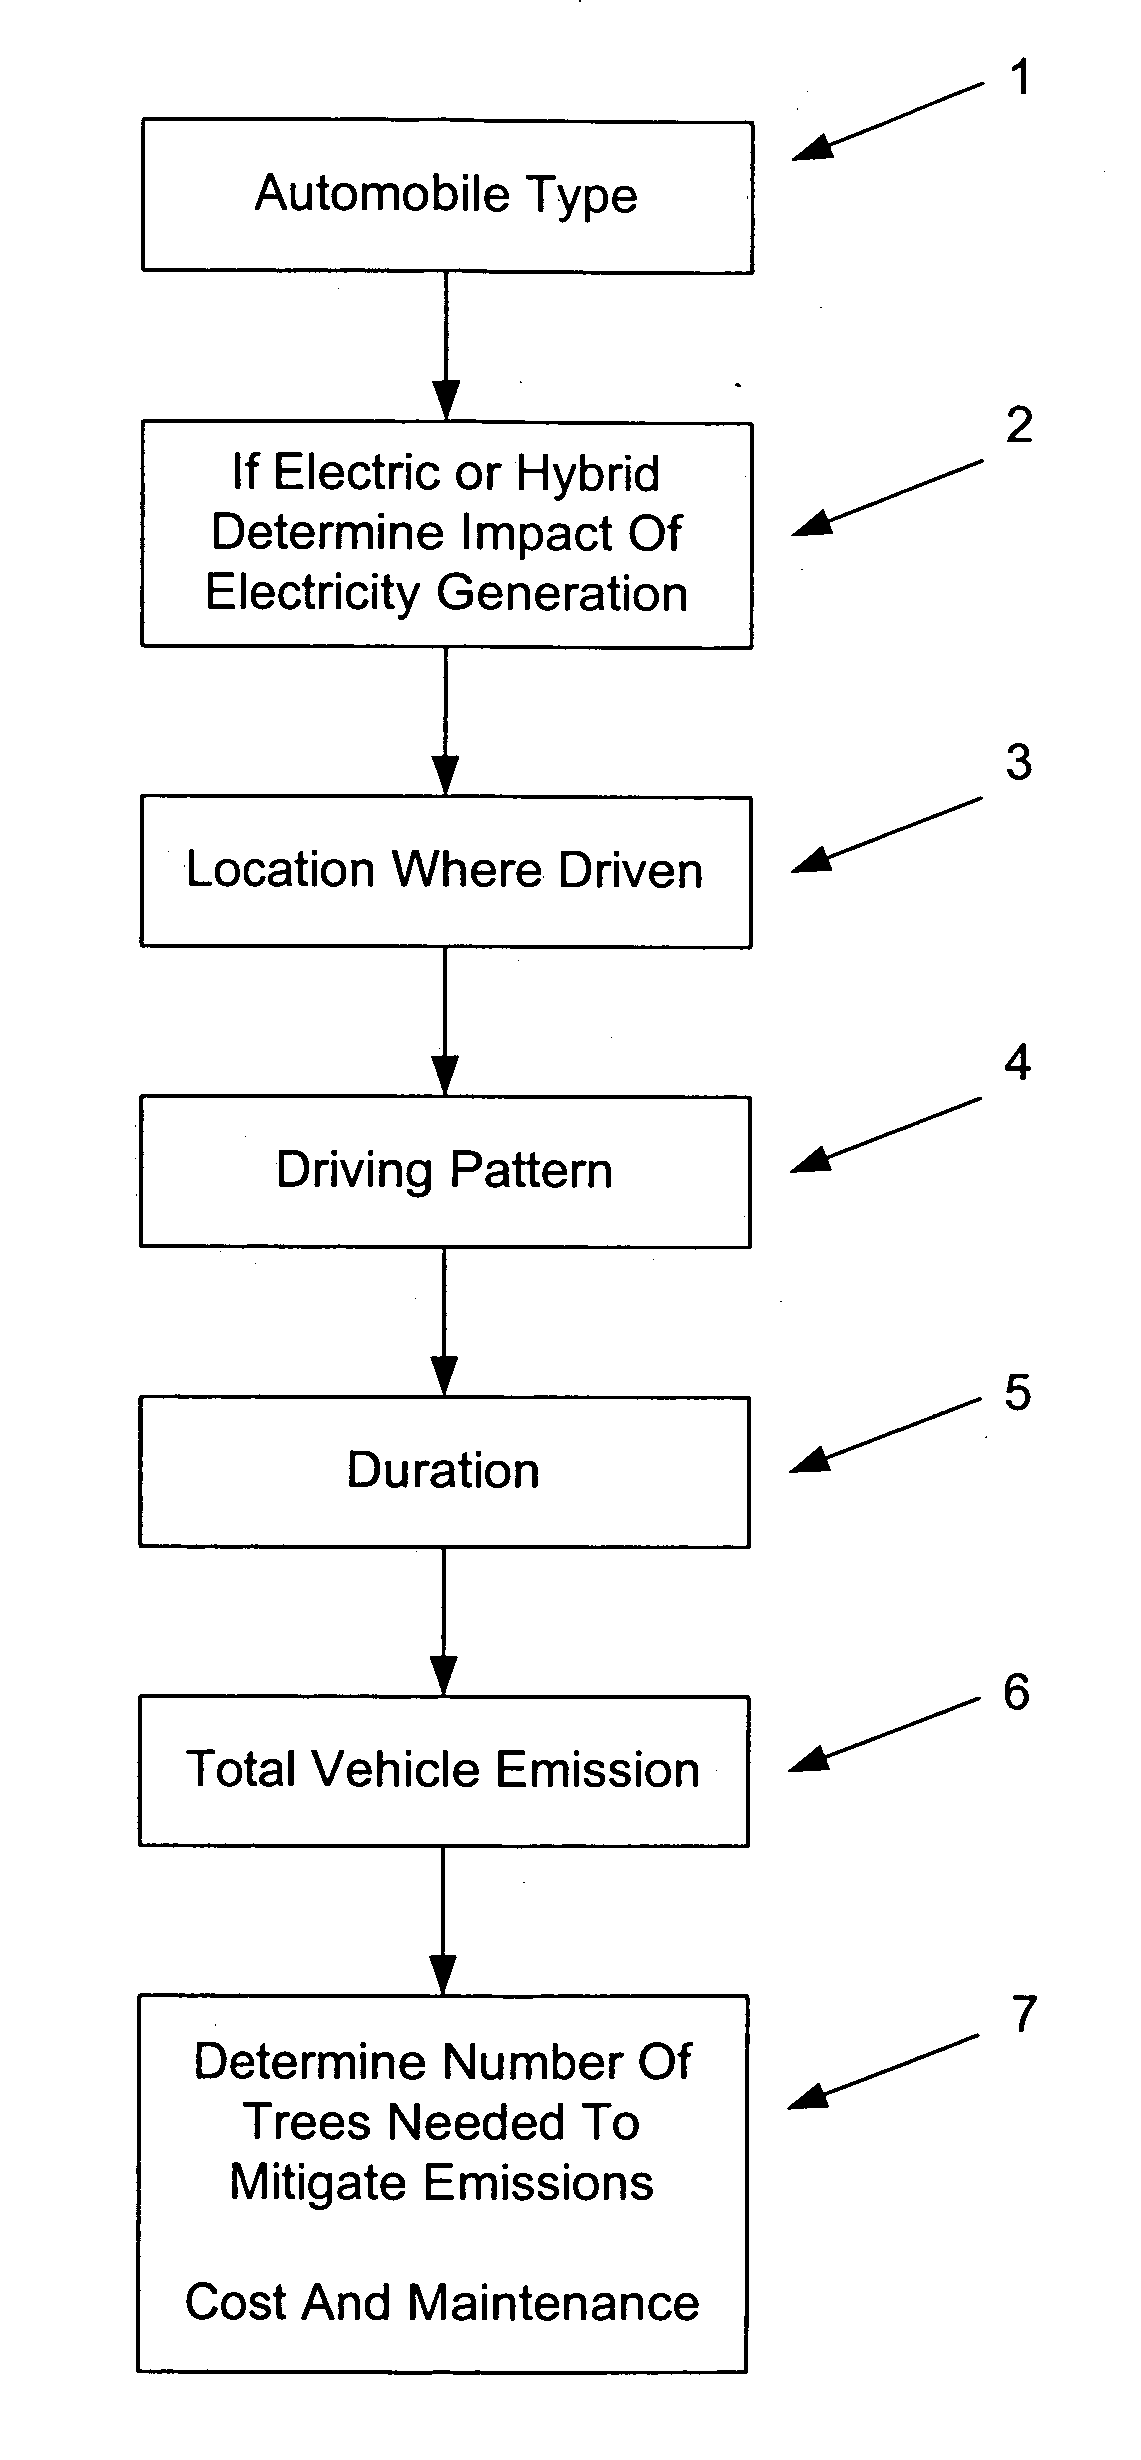 Method of distributing the cost of preserving the environment